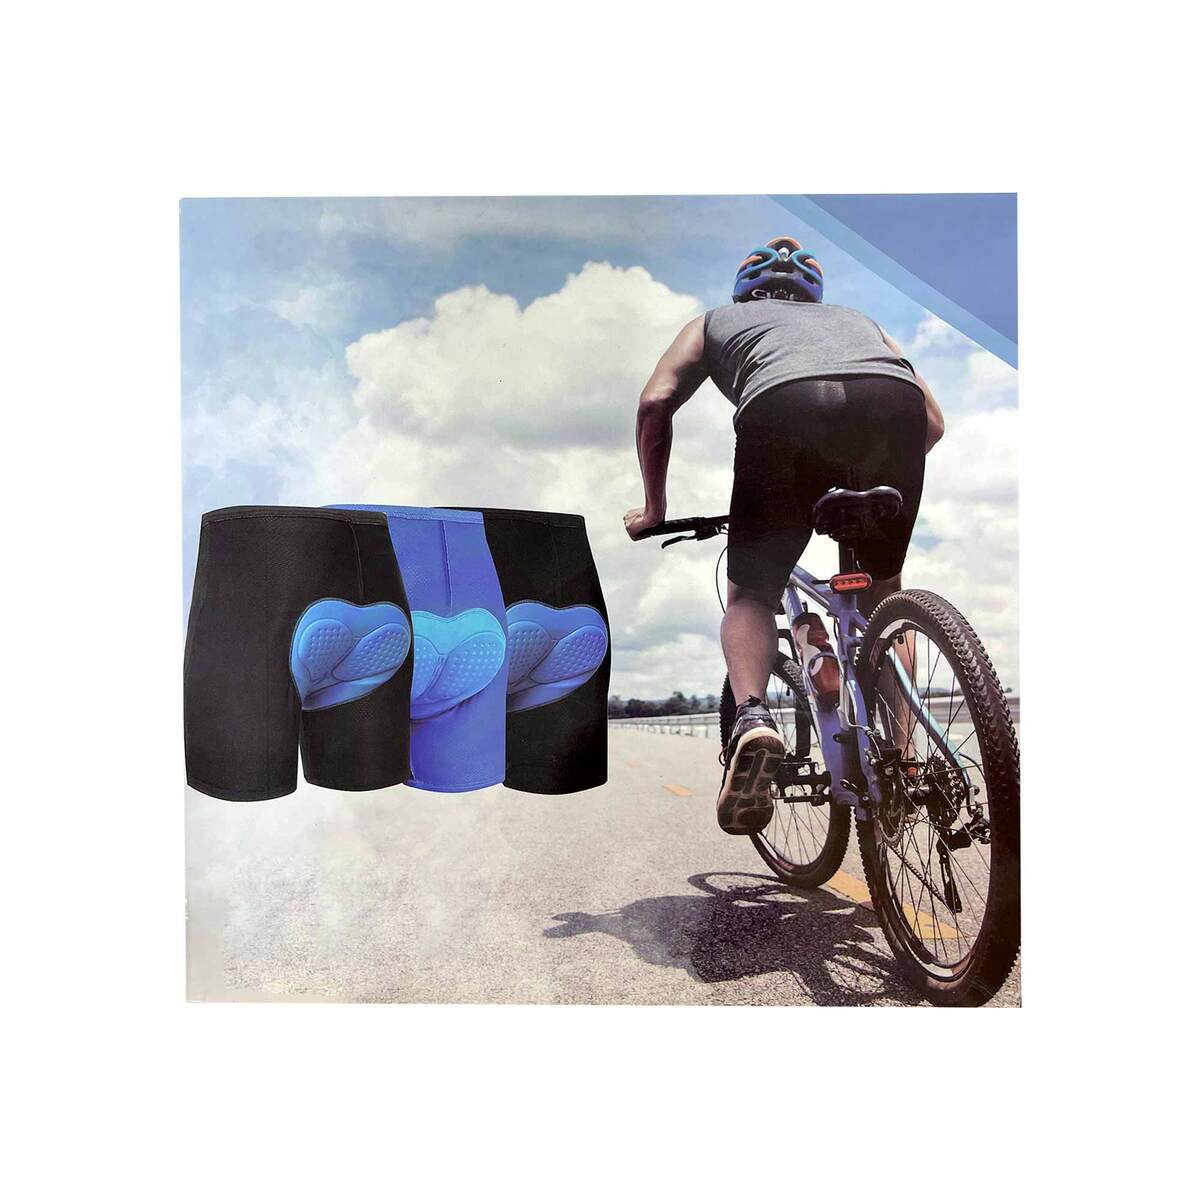 Sports Champion Cycling Shorts YJ-8014 Large, Assorted Colors, Per pc